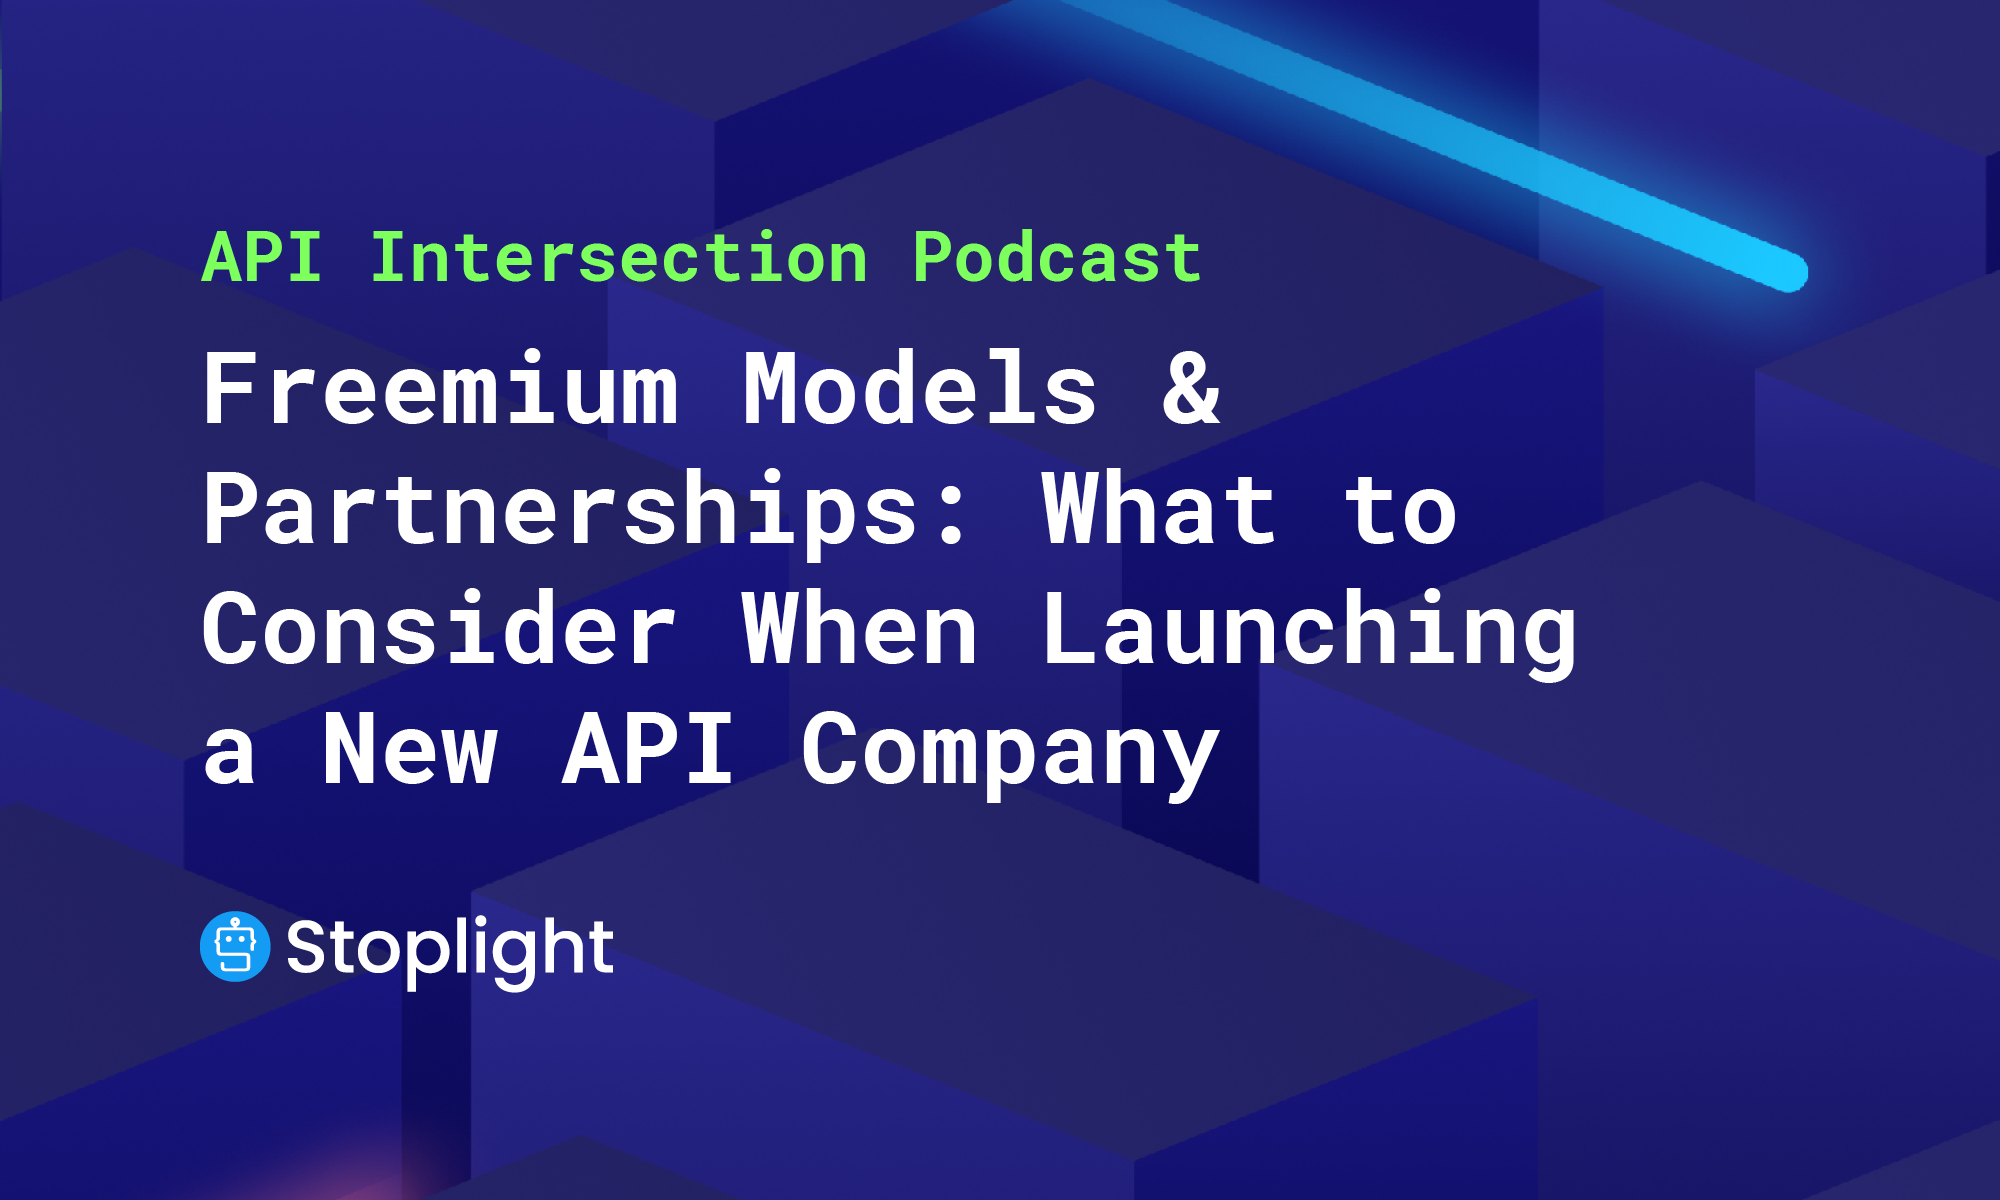 Freemium Models and Partnerships: What to Consider When Launching a New API Company